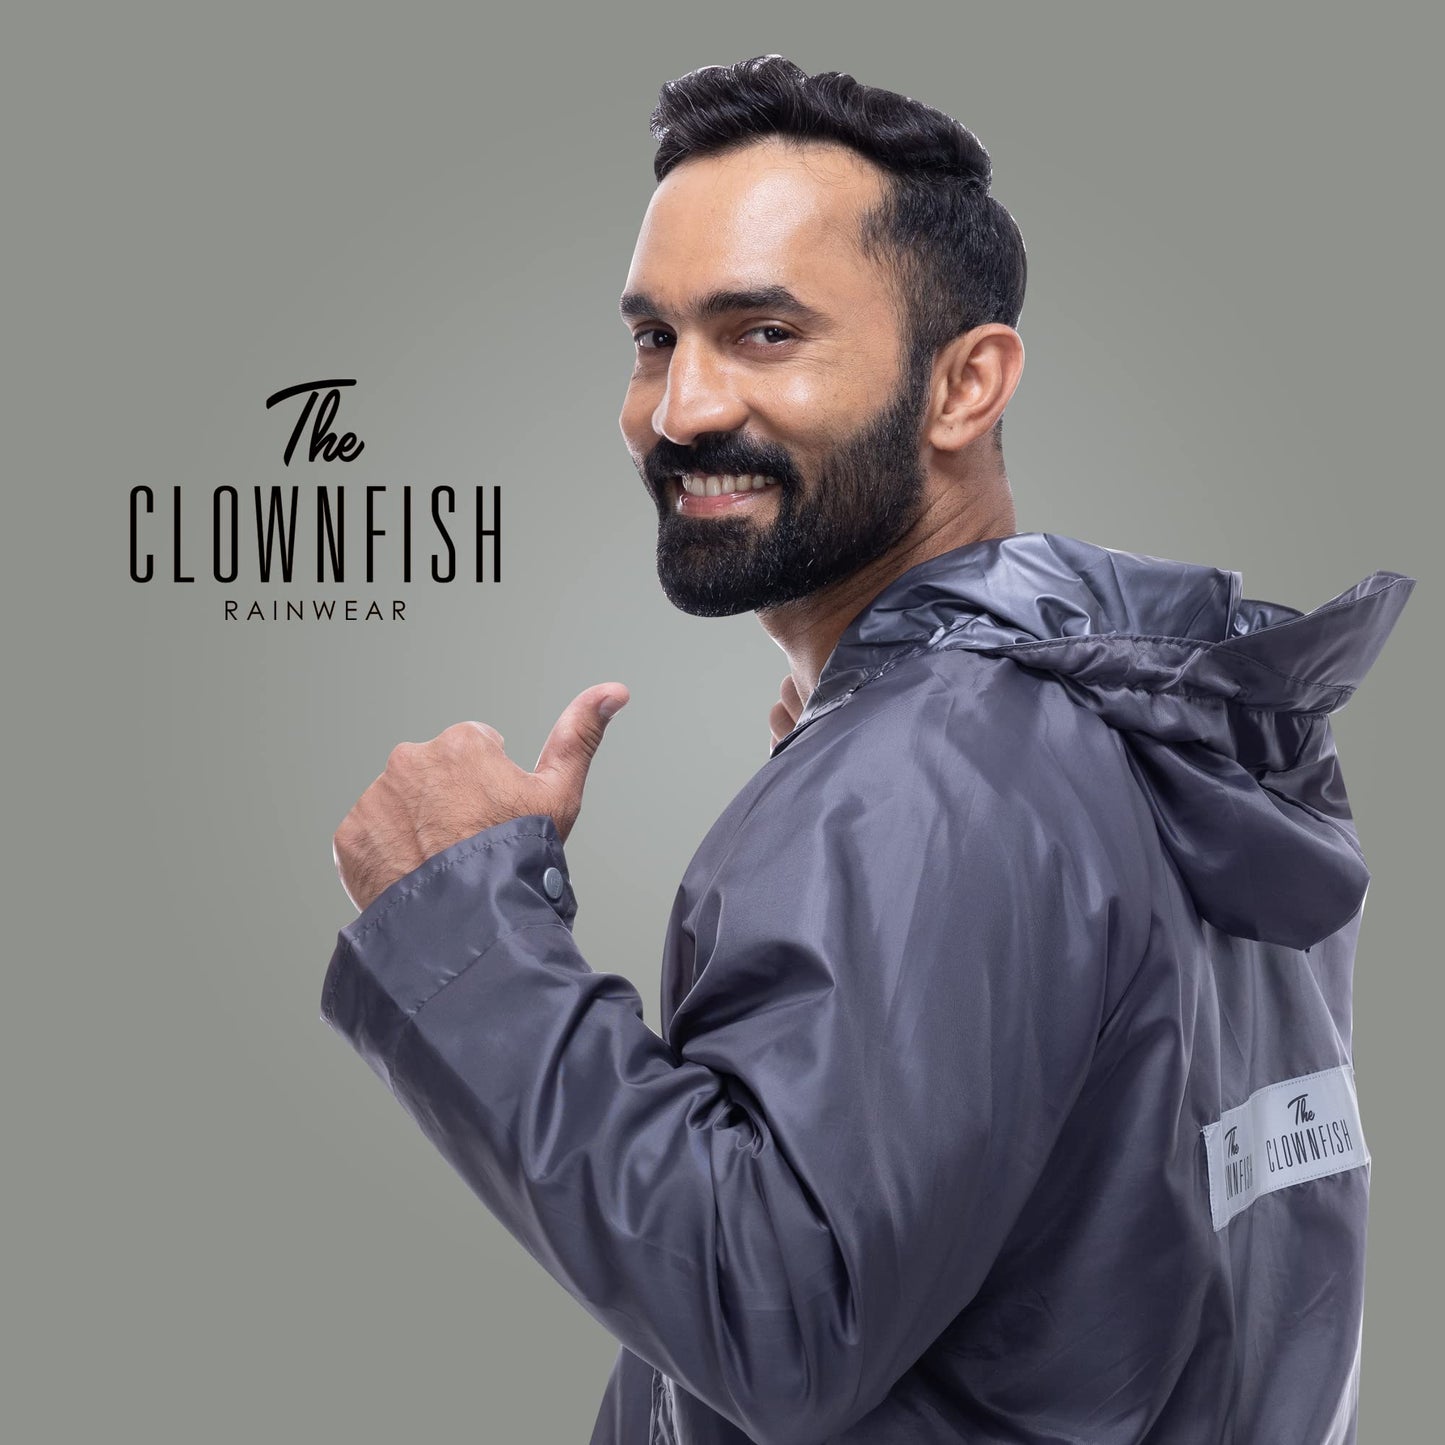 THE CLOWNFISH Christopher Men's Waterproof Polyester Double Coating Reversible Raincoat with Hood. Set of Top and Bottom. Printed Plastic Pouch with Rope (Black, Large)